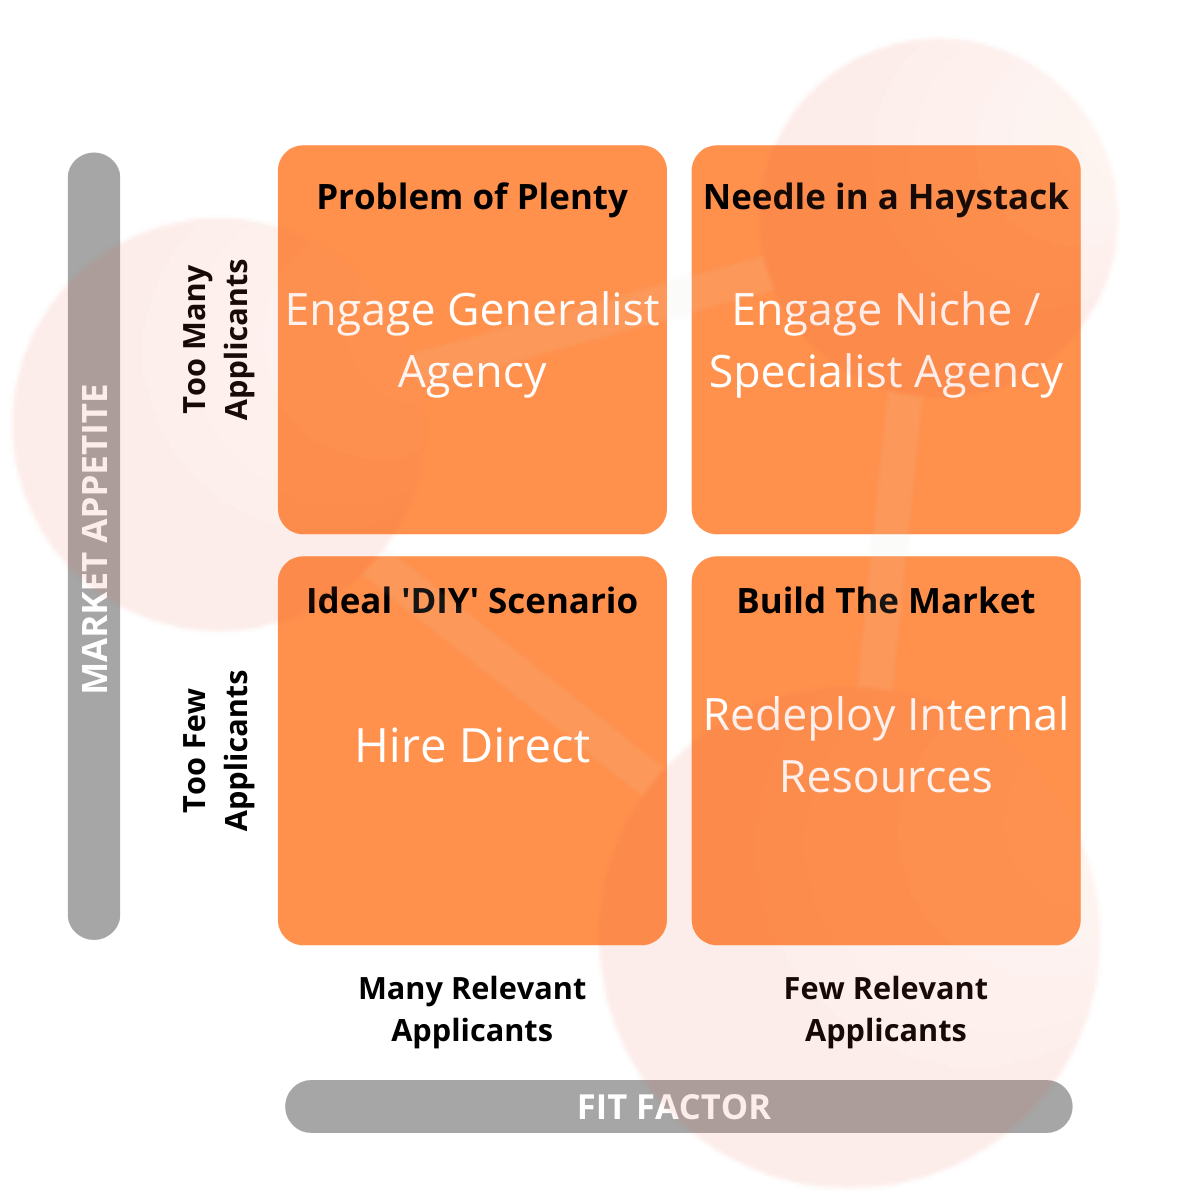 How to Select the Right Recruitment Strategy The Hiring Matrix